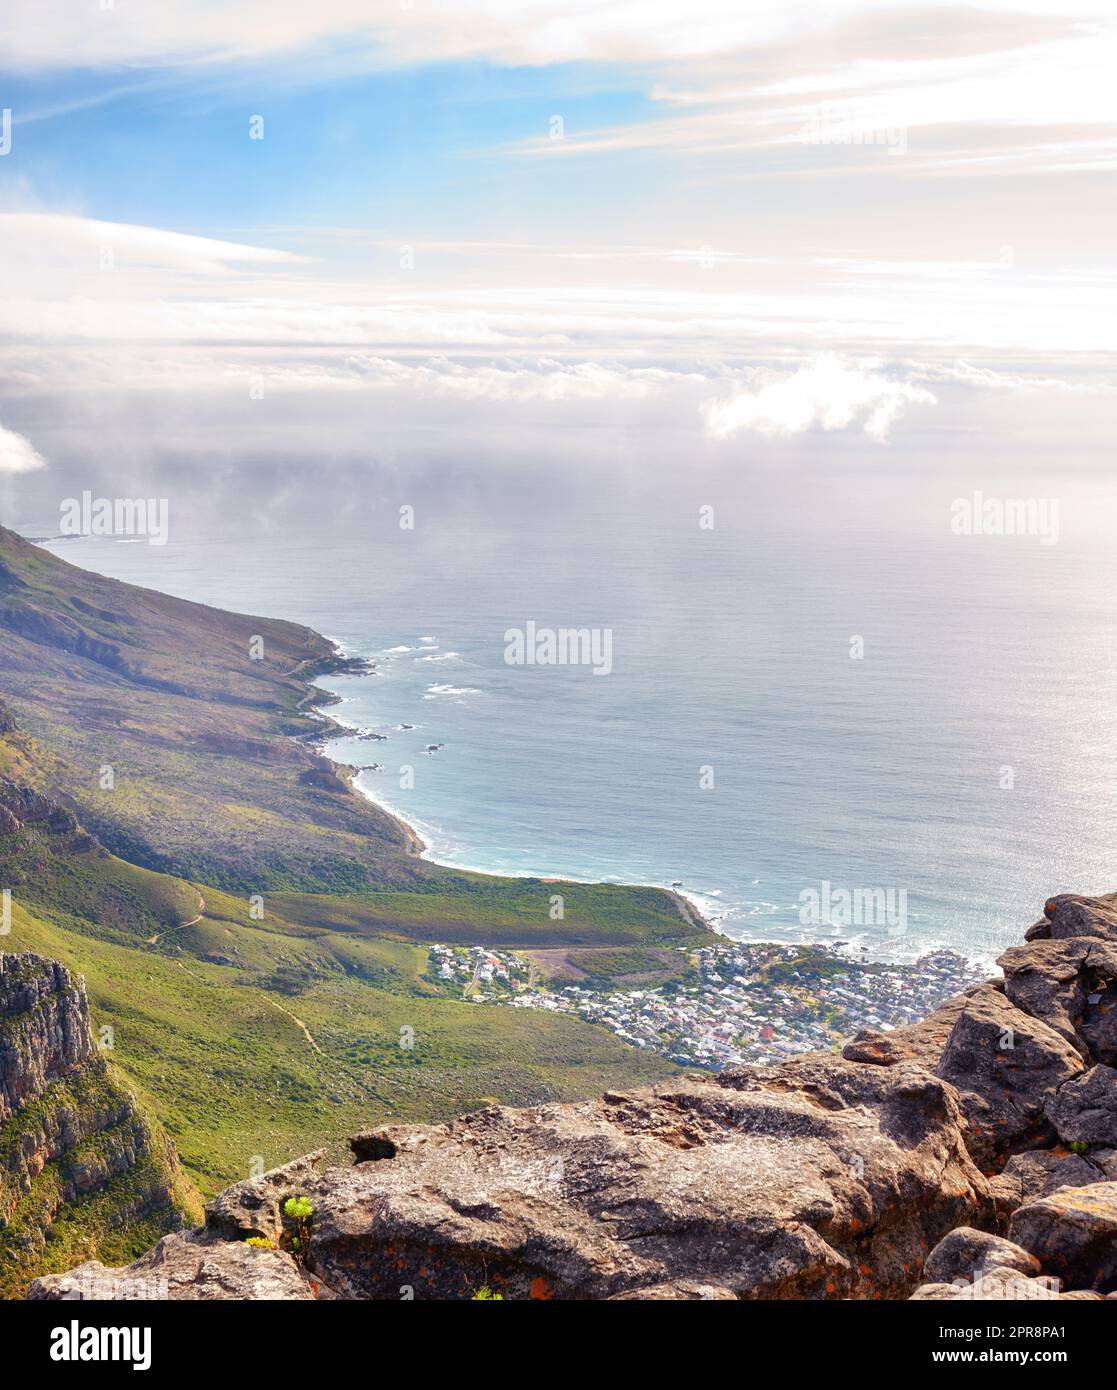 Landscape of Lions Head mountain with houses, ocean and cloudy sky with copy space. Perspective view of green mountains with lots of vegetation overlooking an urban city in Cape Town, South Africa Stock Photo